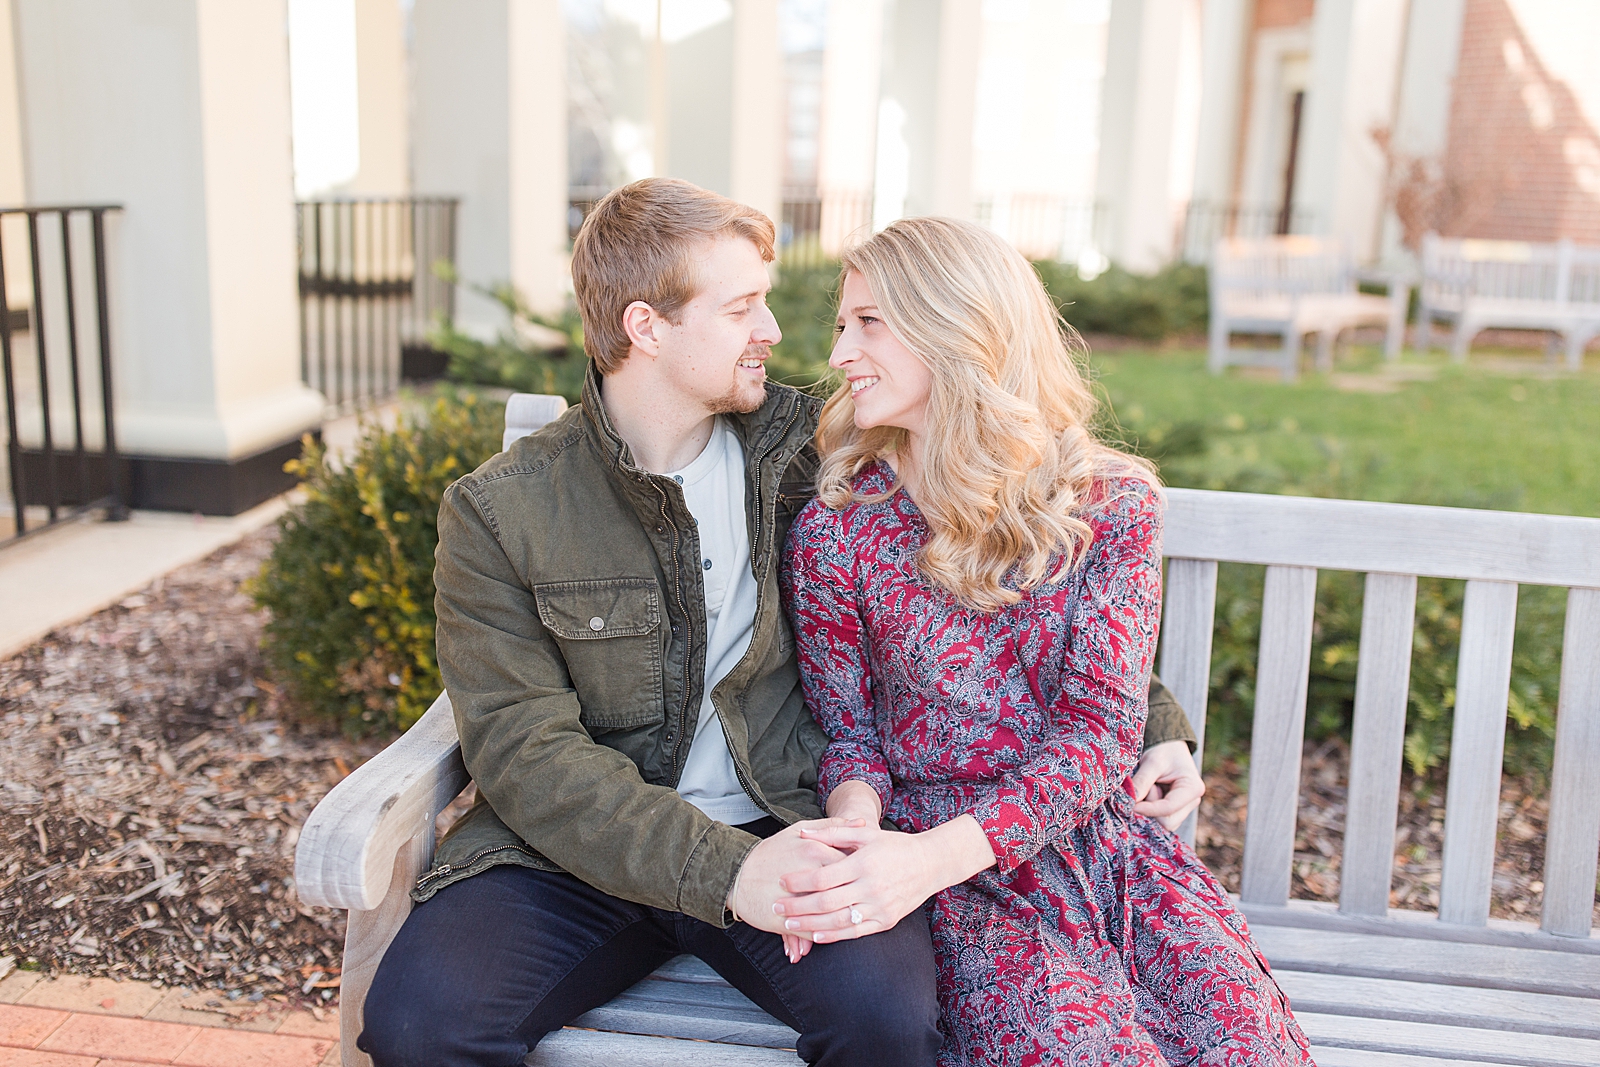 Winston-Salem Engagement Session couple sitting on bench smiling at each other Photo